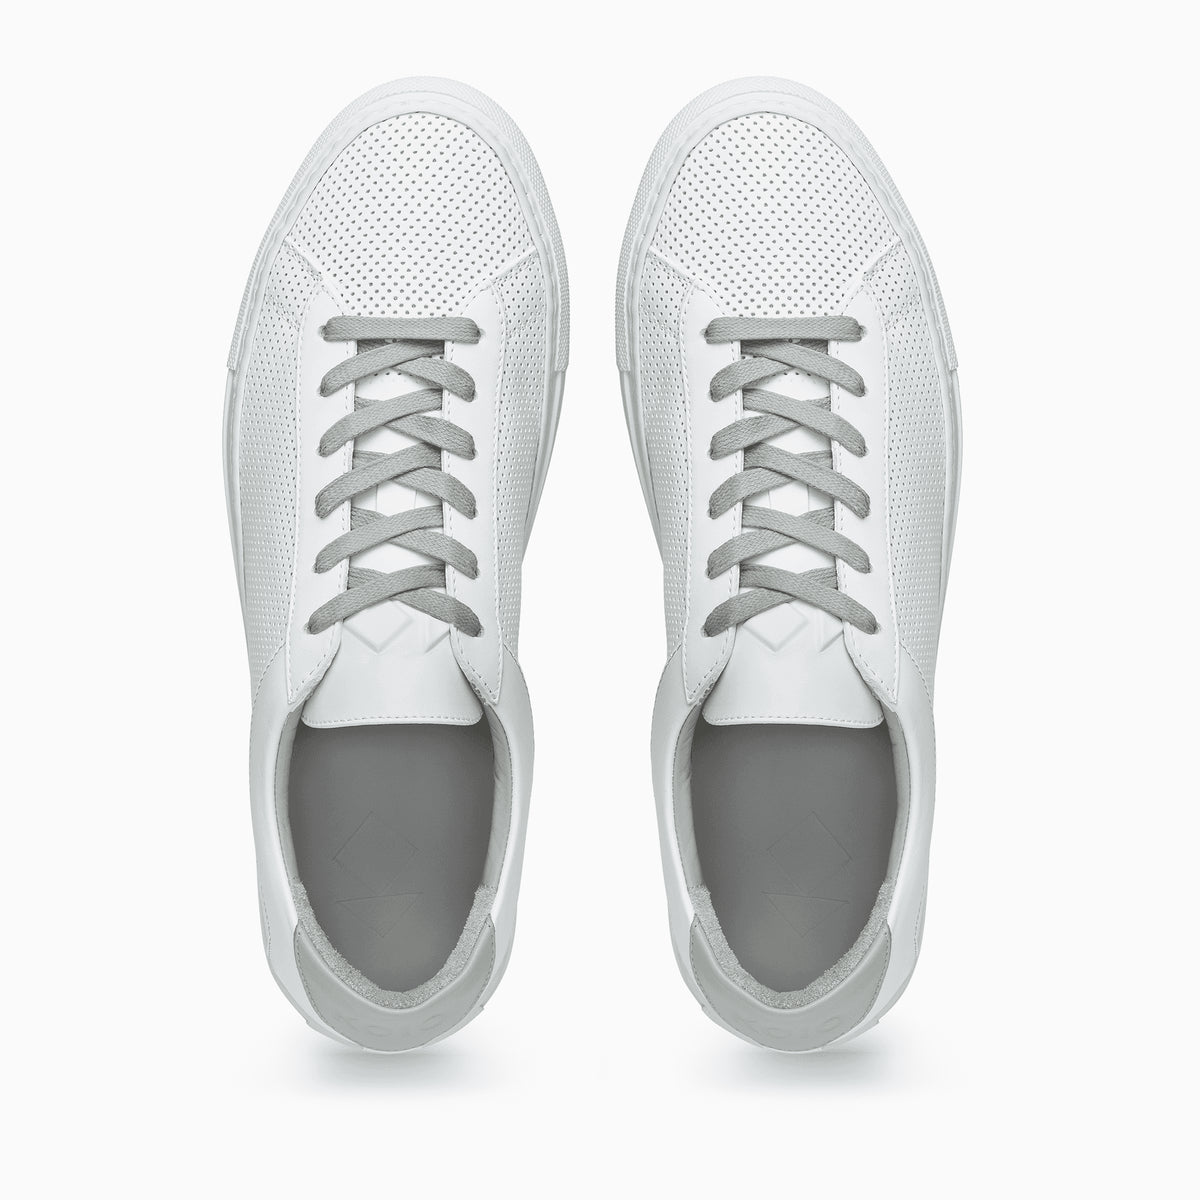 nike white perforated leather shoes